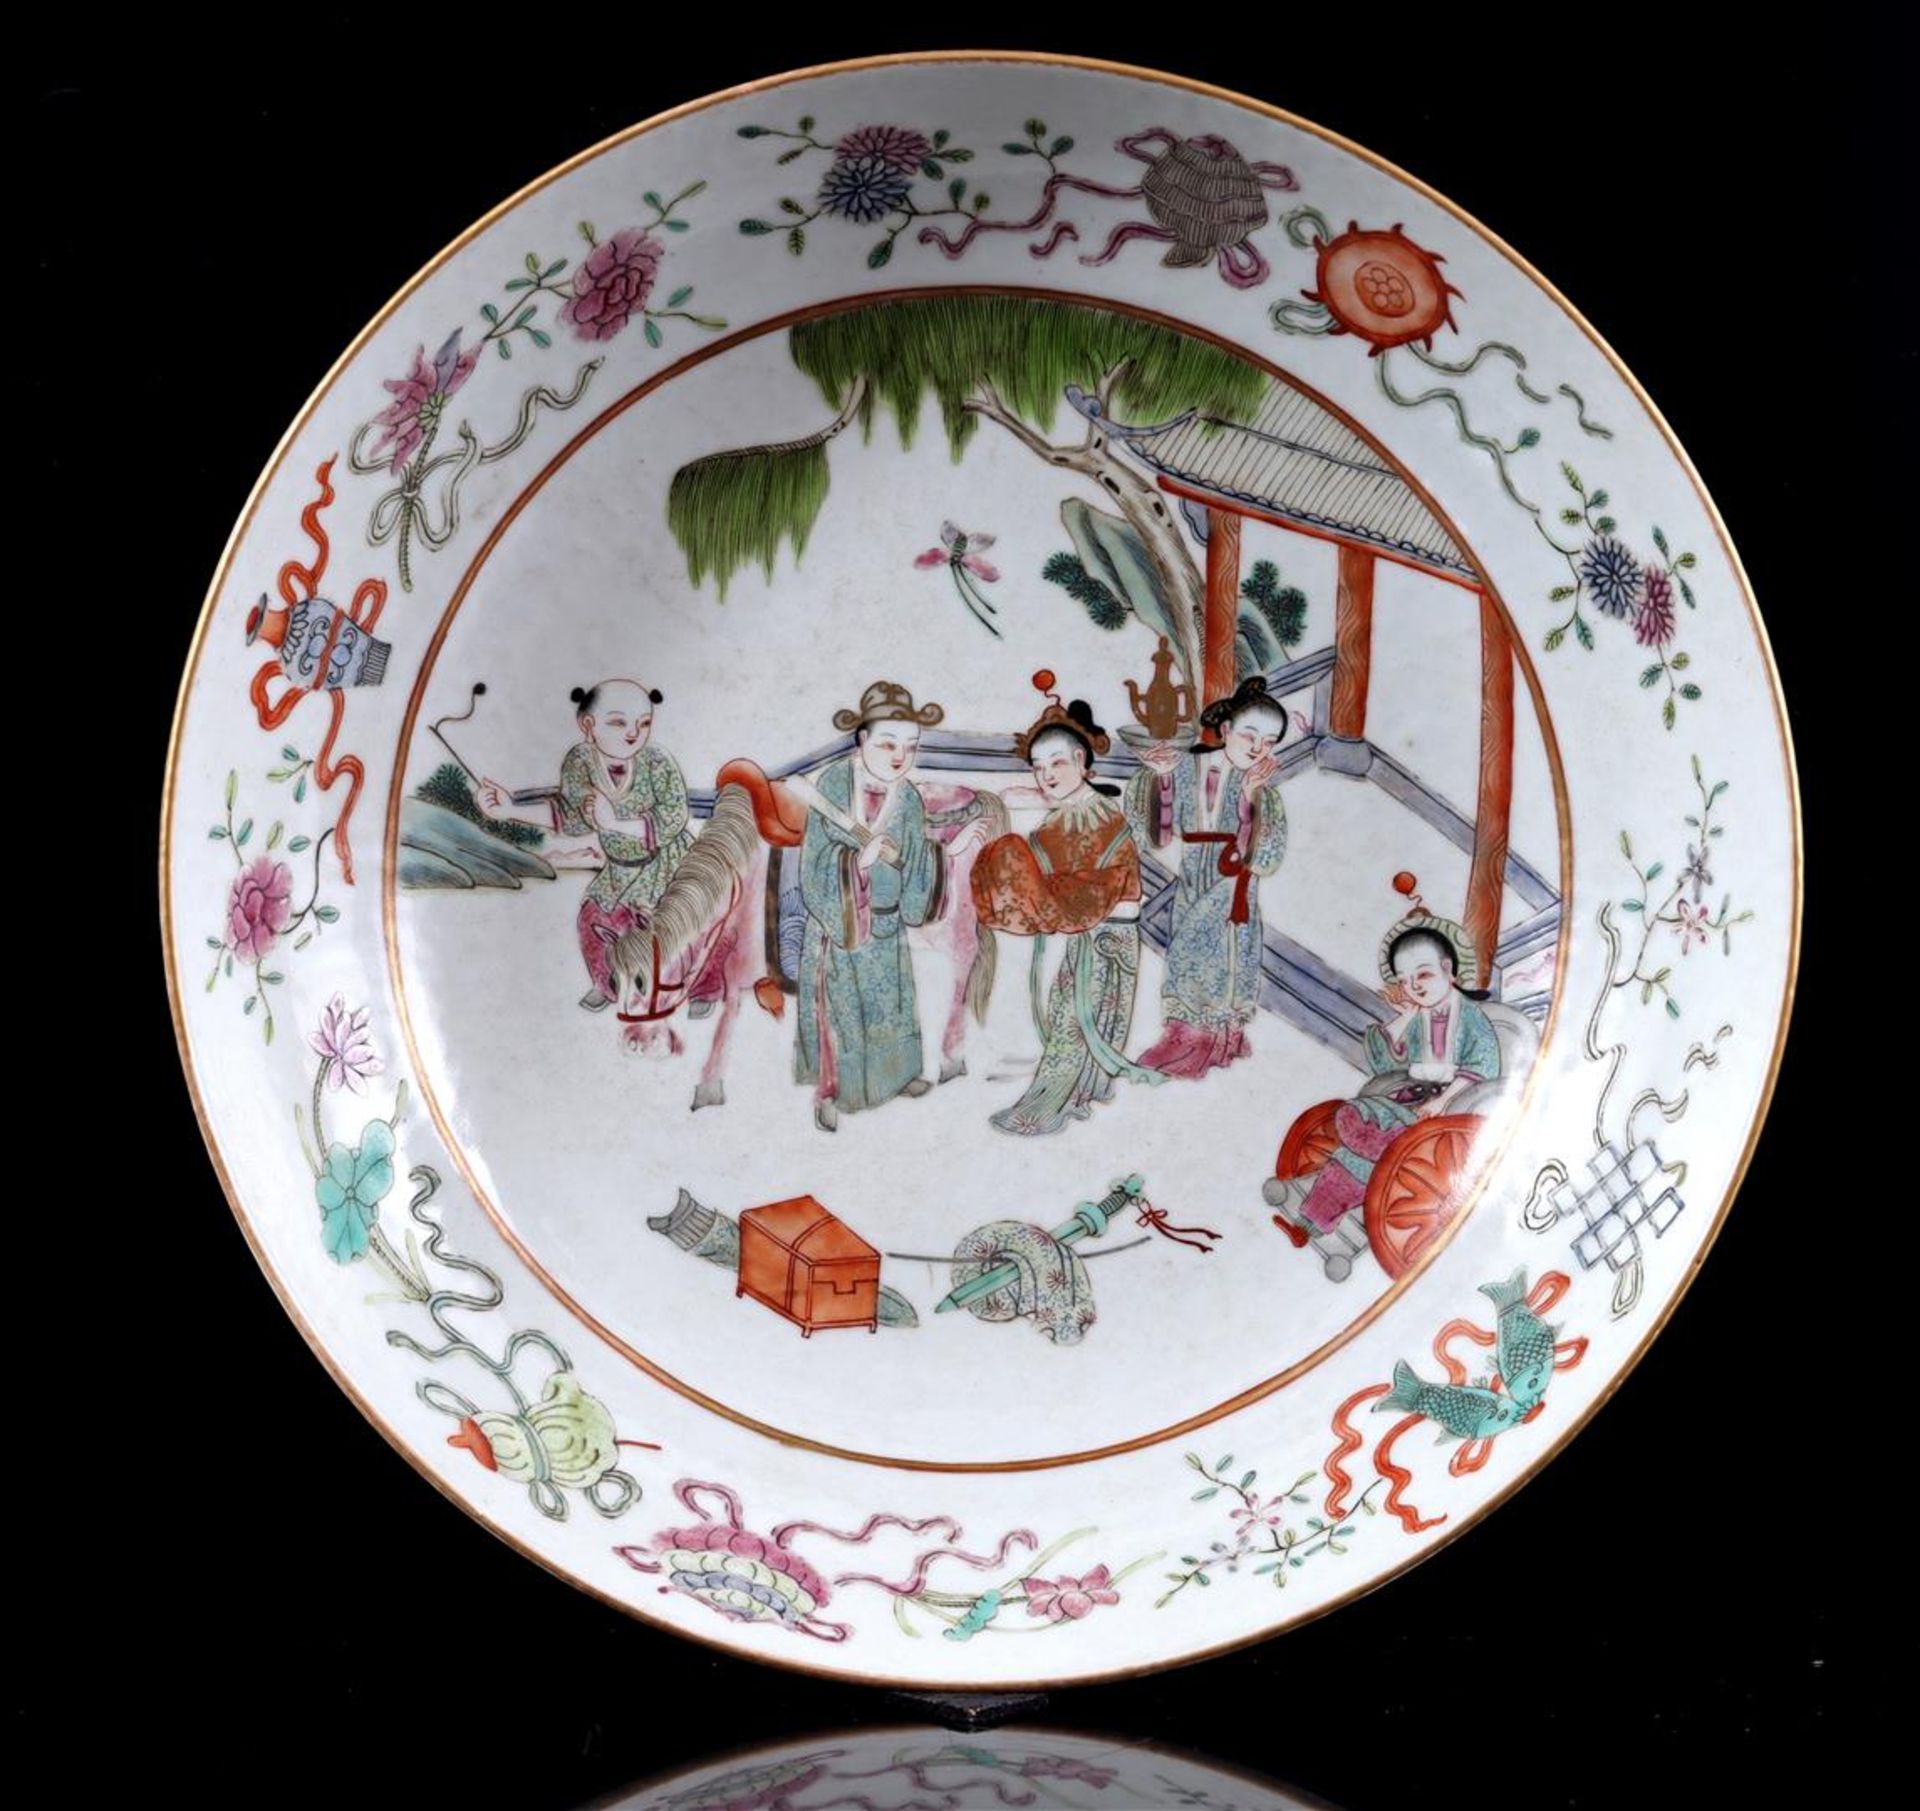 Porcelain dish with a decoration of people